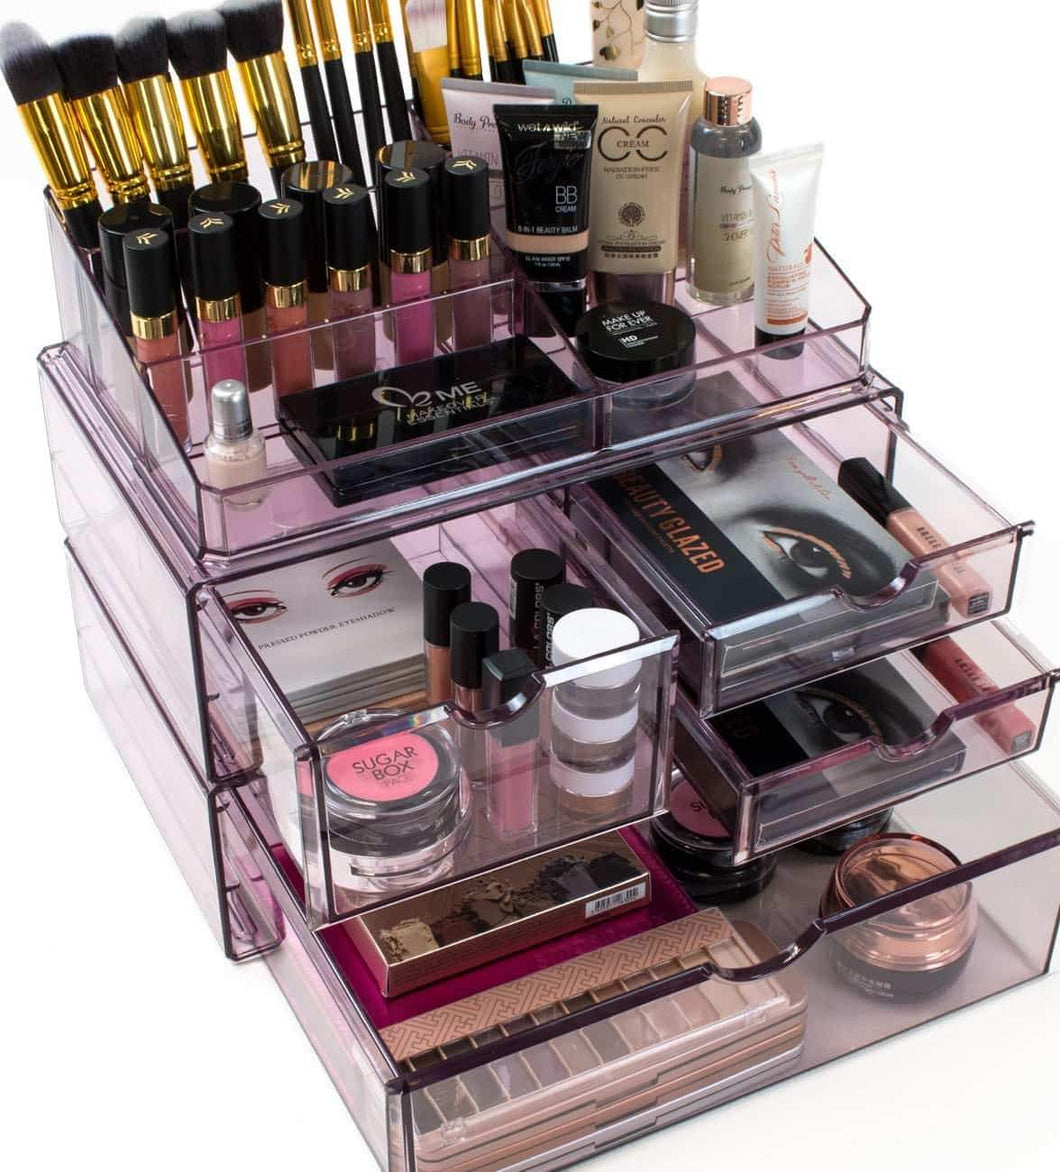 Get sorbus acrylic cosmetics makeup and jewelry storage case x large display sets interlocking scoop drawers to create your own specially designed makeup counter stackable and interchangeable purple